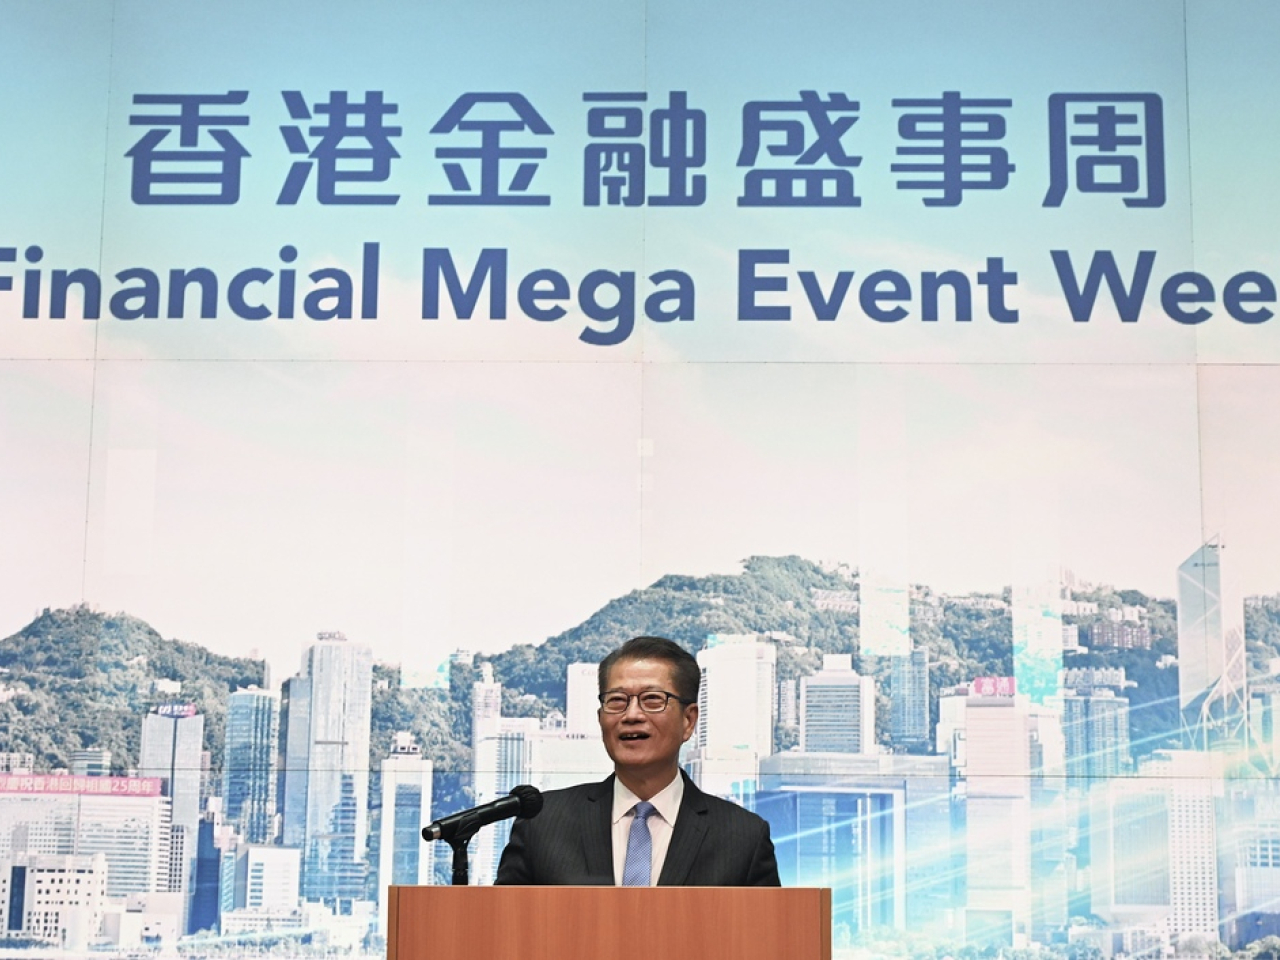 FS expects more key enterprises to come to HK